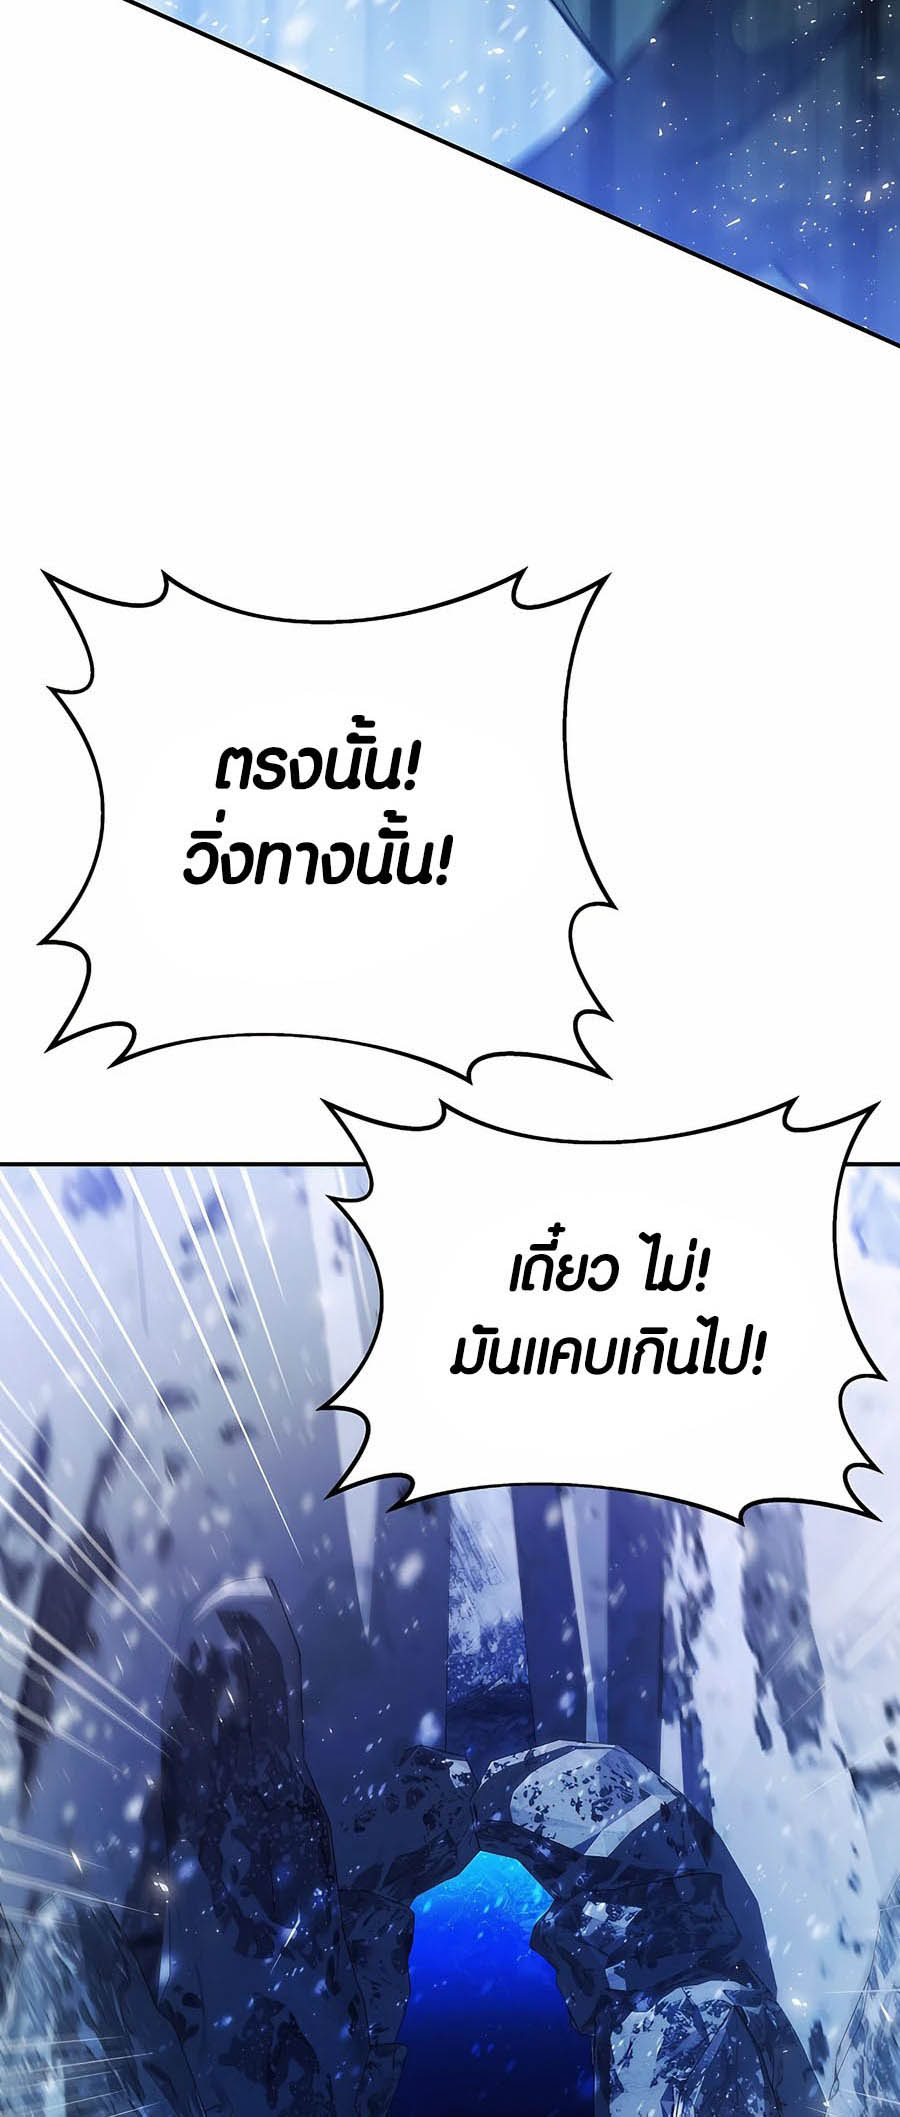 à¸­à¹ˆà¸²à¸™à¸¡à¸±à¸™à¸®à¸§à¸² à¹€à¸£à¸·à¹ˆà¸­à¸‡ The Part Time Land of the Gods 57 39